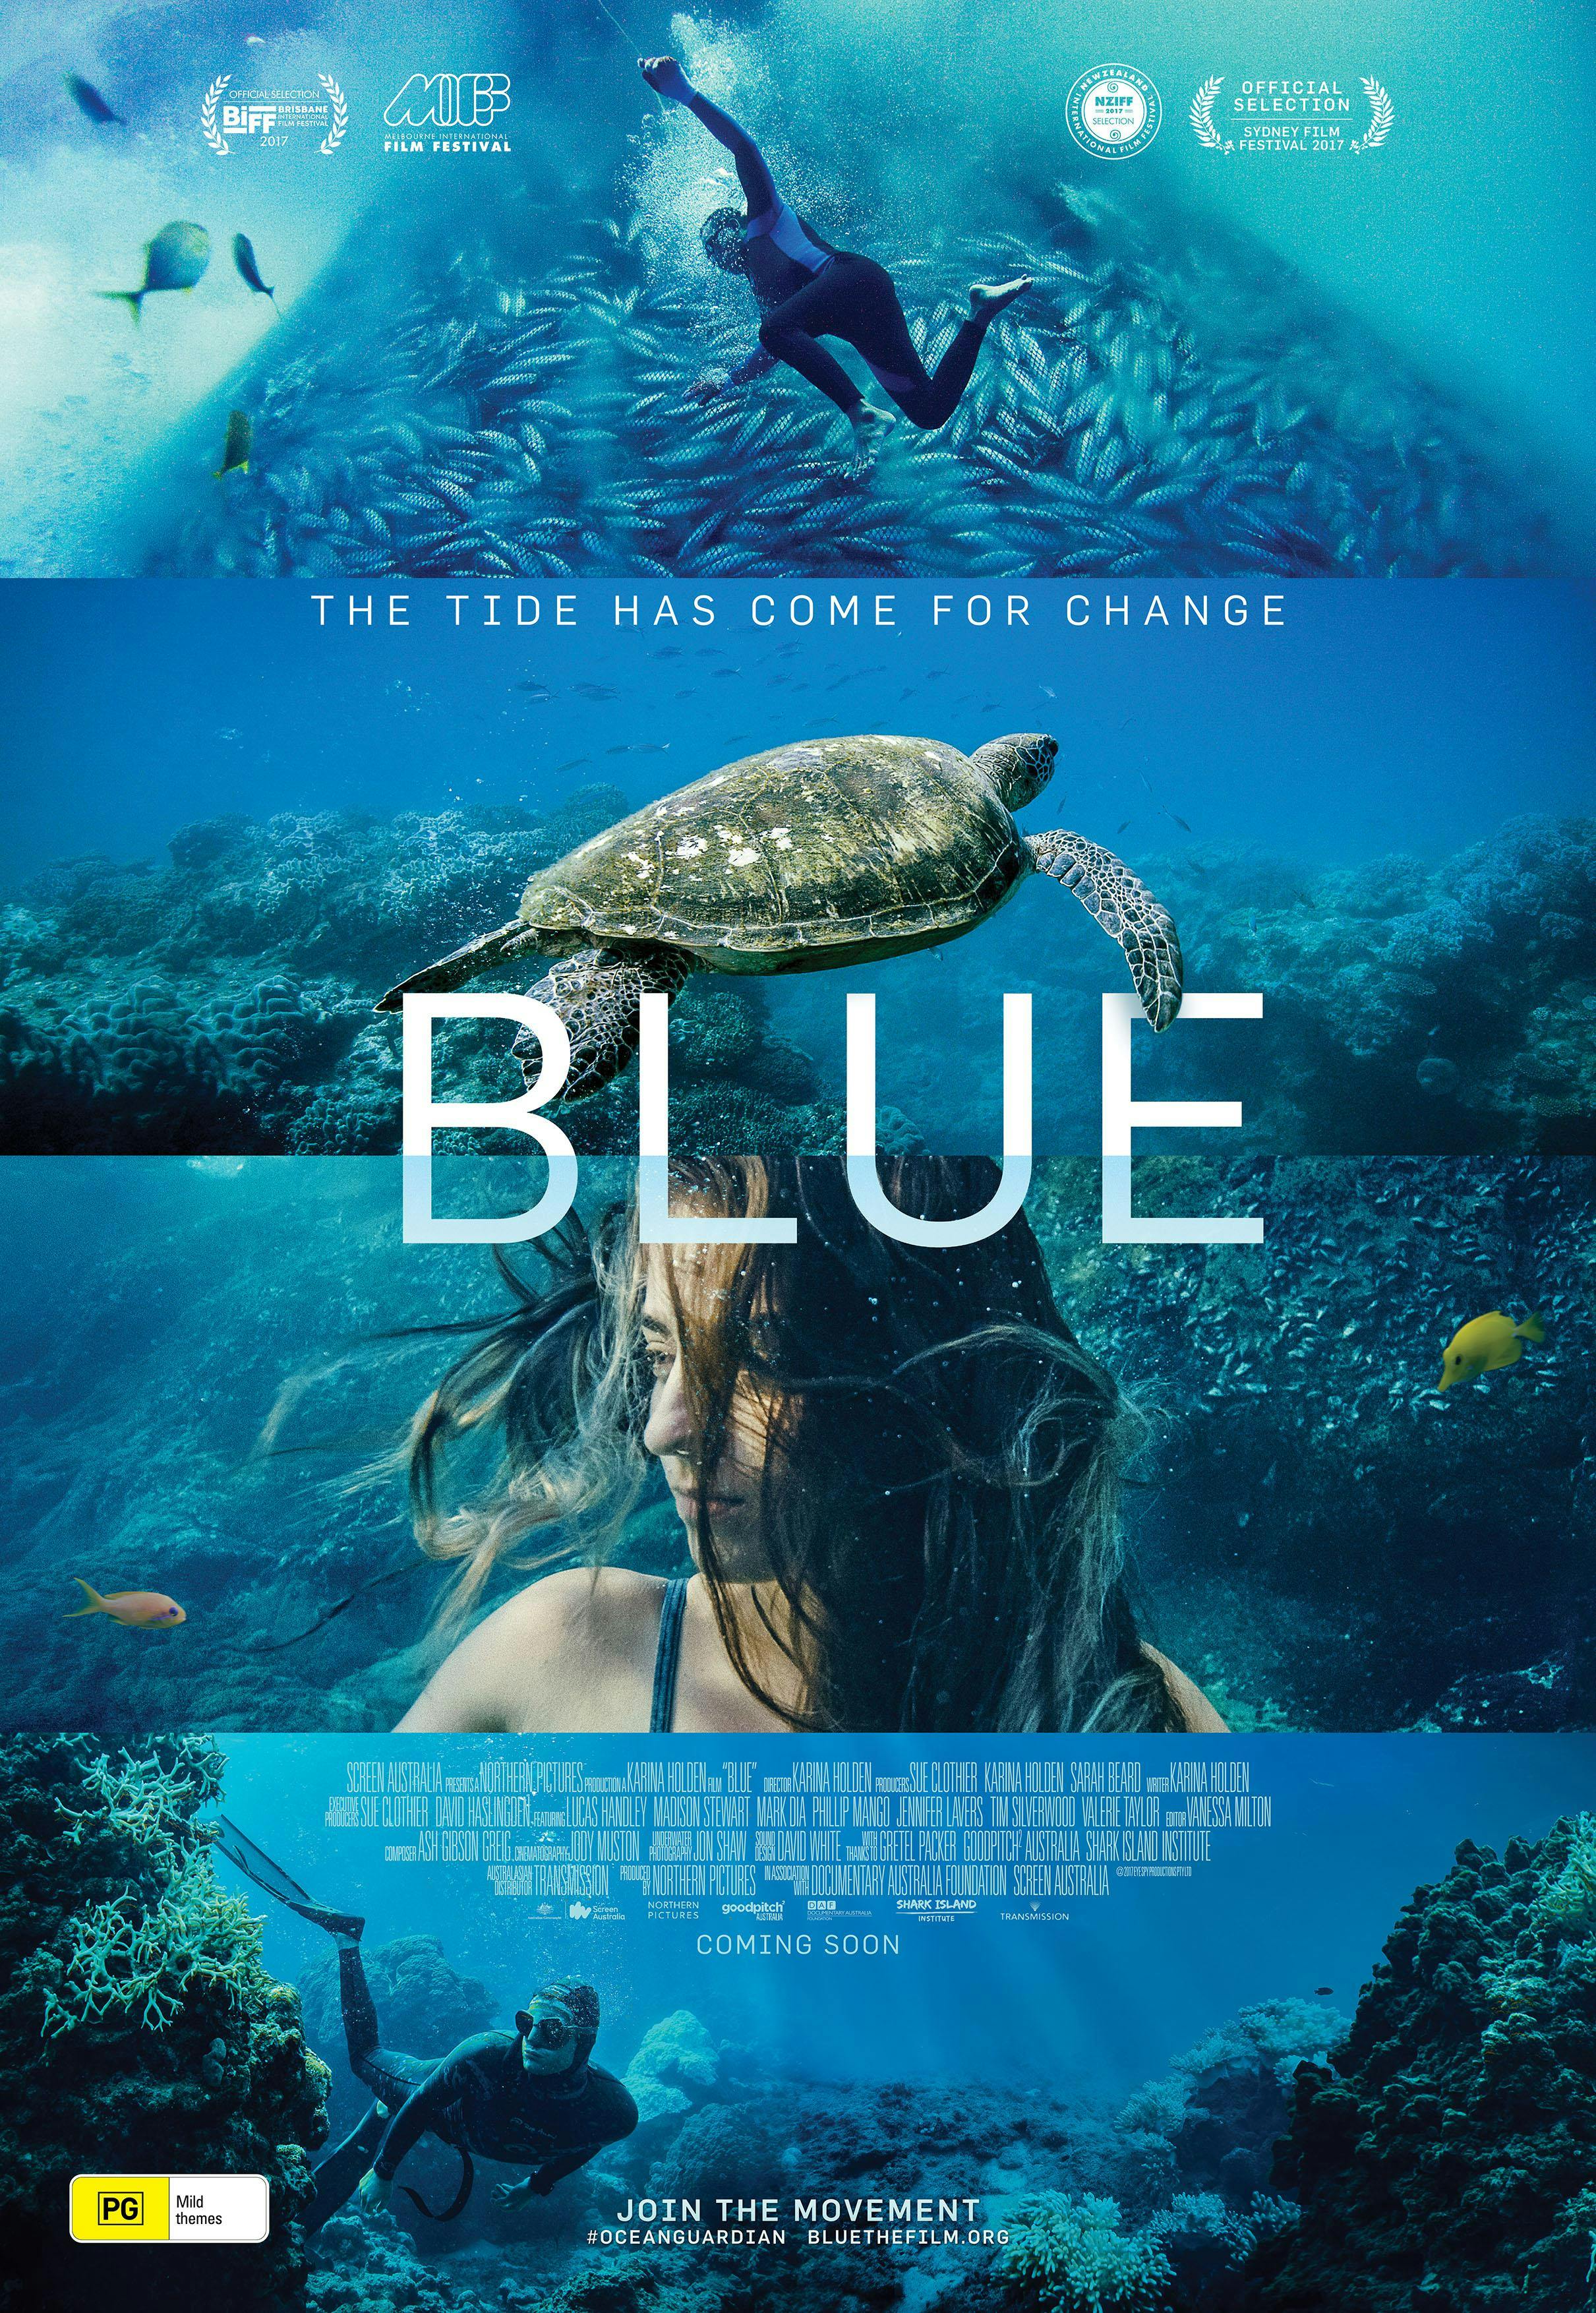 Screening of 'Blue' and Q&A